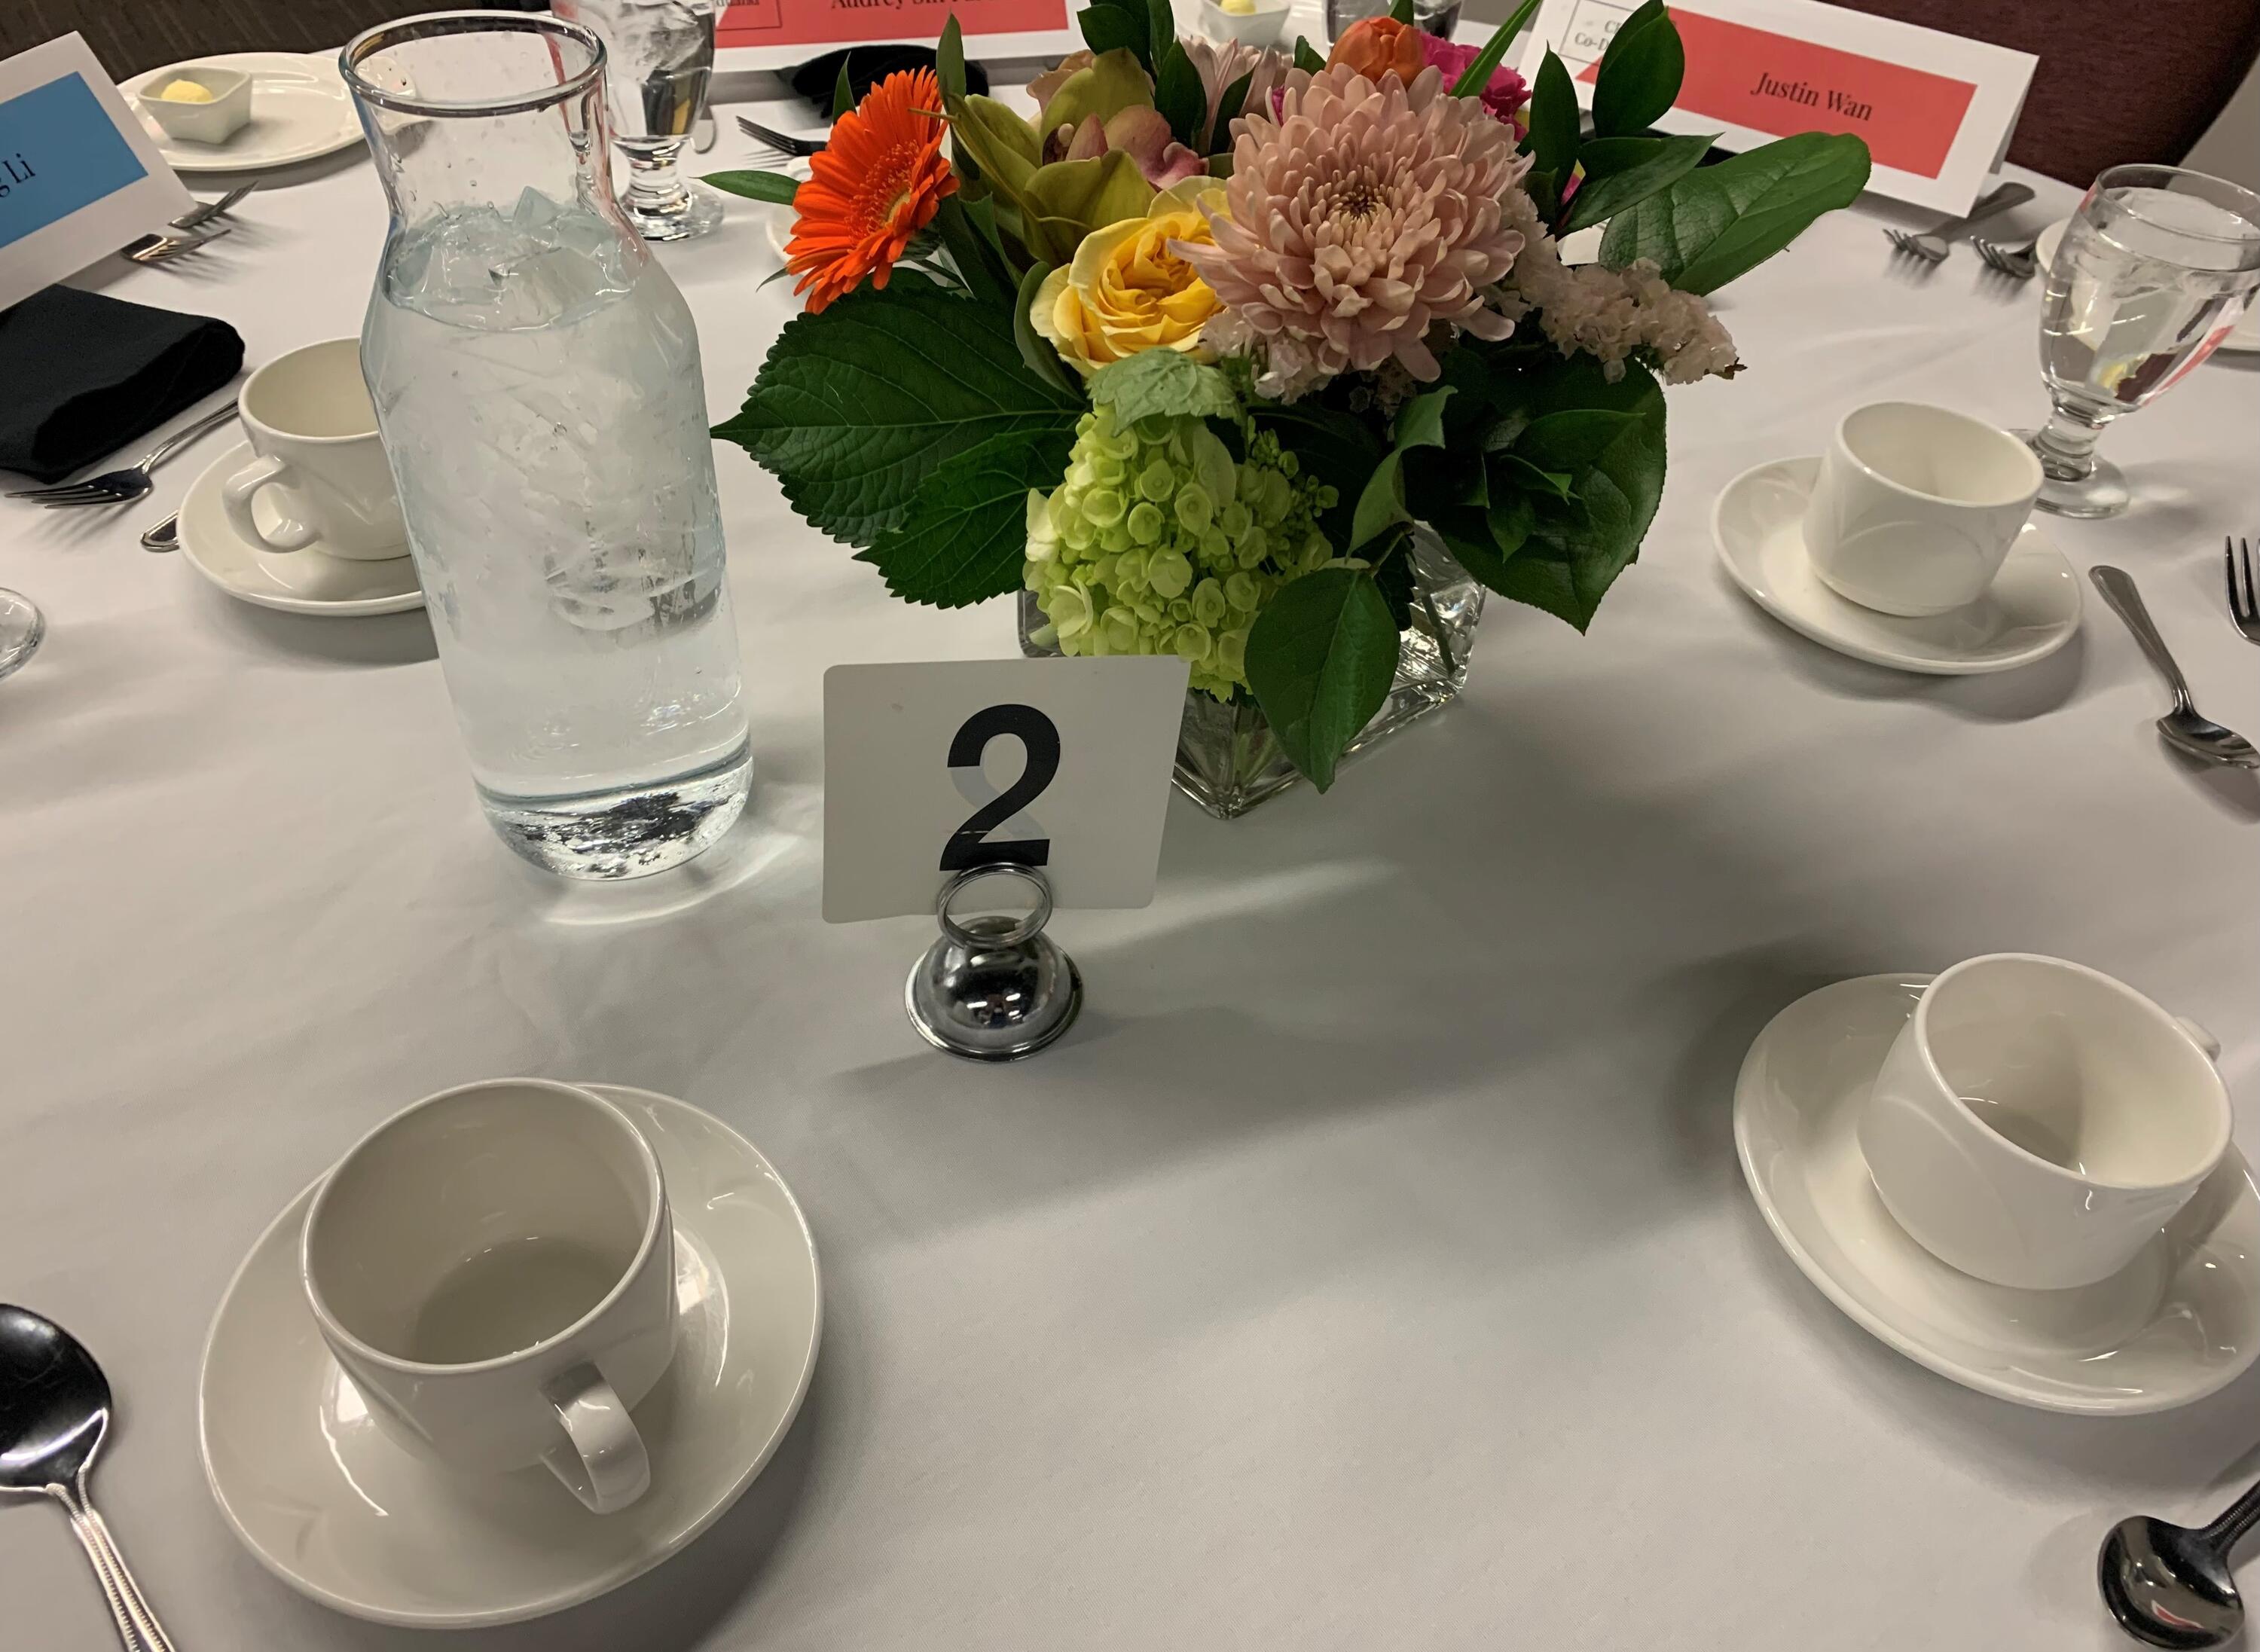 Table 2 at the CFM Graduation Dinner set with dishes, name cards, a pitcher of ice water, and a flower centrepiece